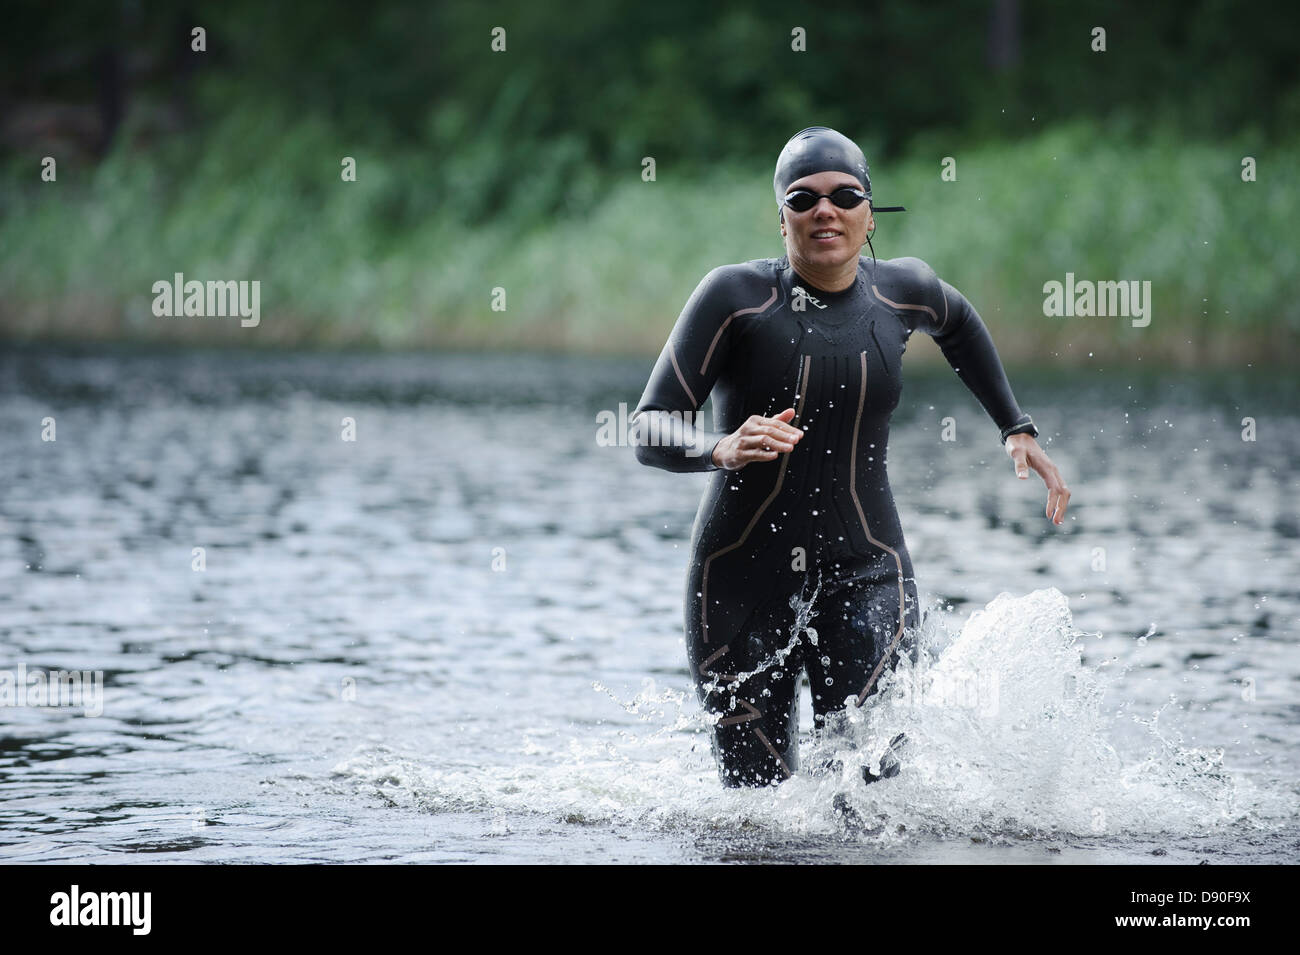 Woman running in river Banque D'Images